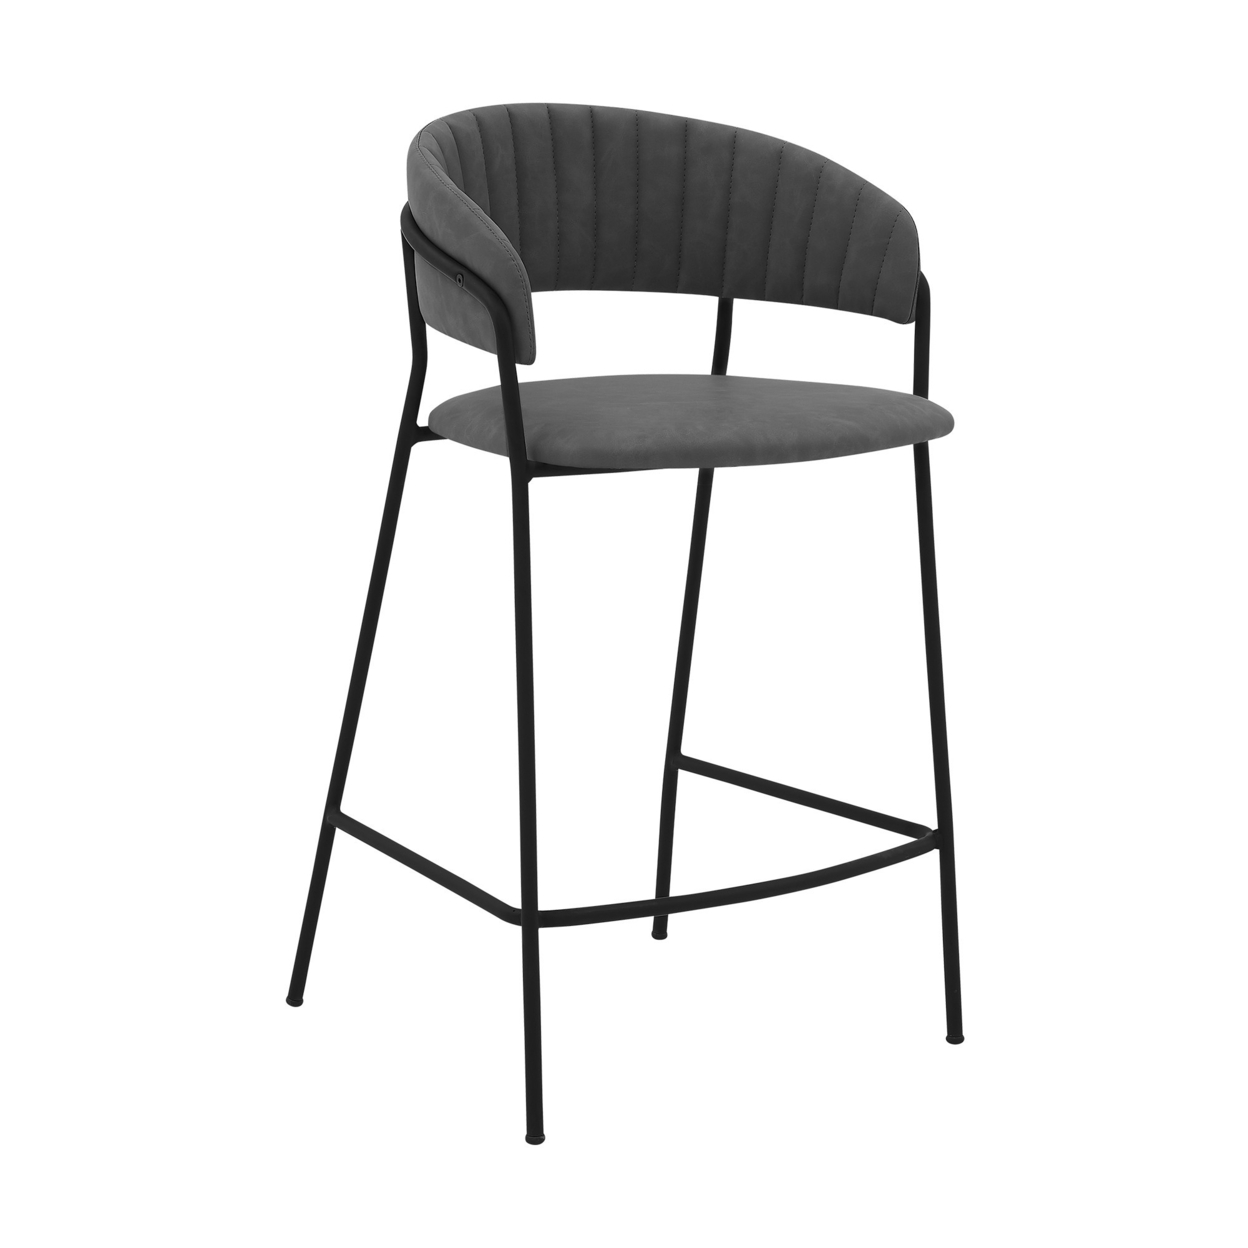 26 Inch Leatherette Seat Counter Height Barstool,Gray And Black- Saltoro Sherpi